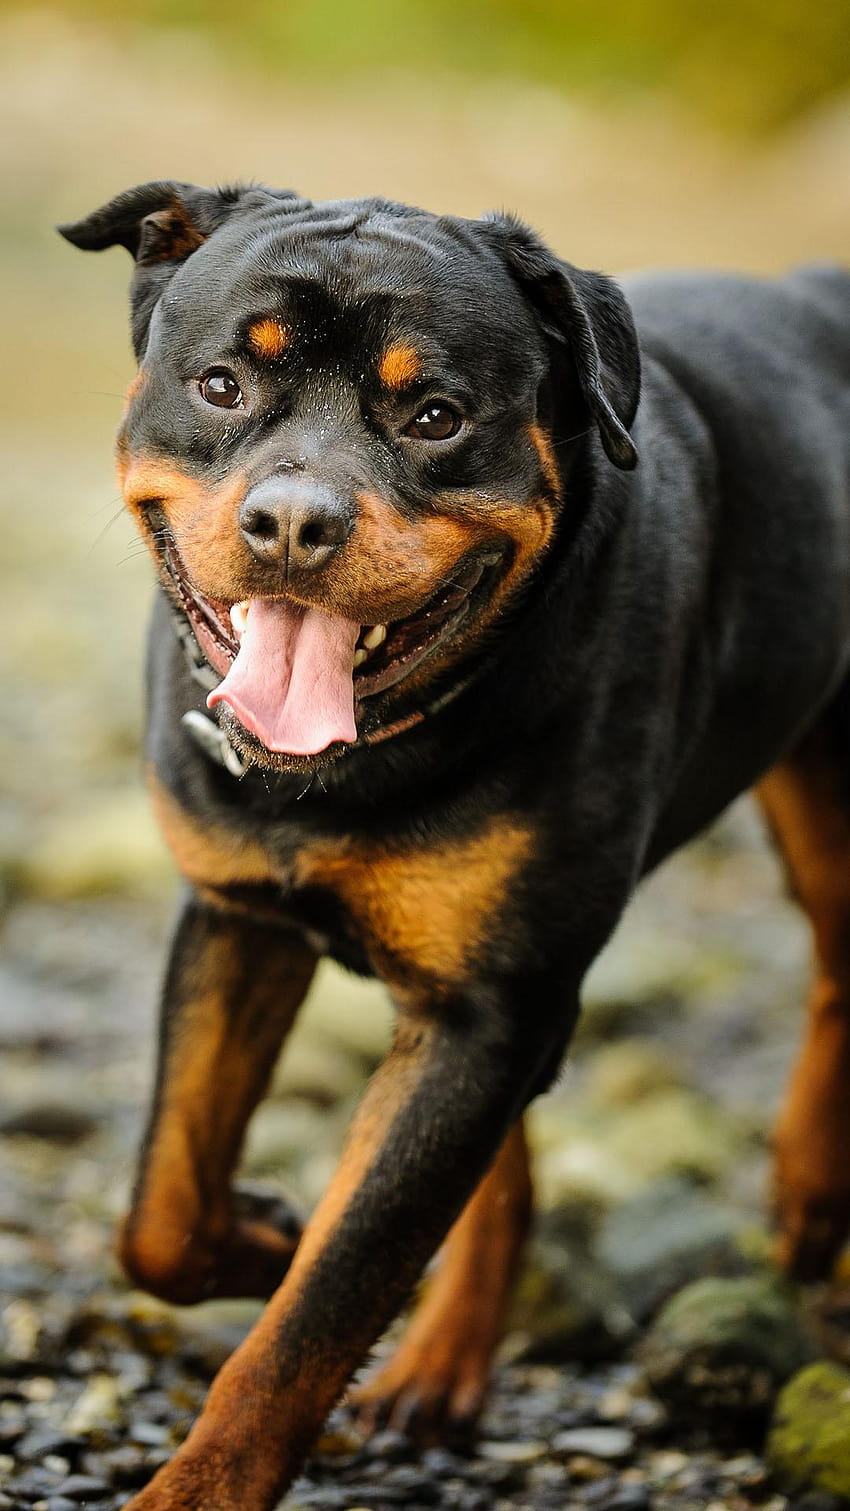 The Rottweiler Puppy In The Grass Background, Picture Of Rottweiler Puppy  Background Image And Wallpaper for Free Download